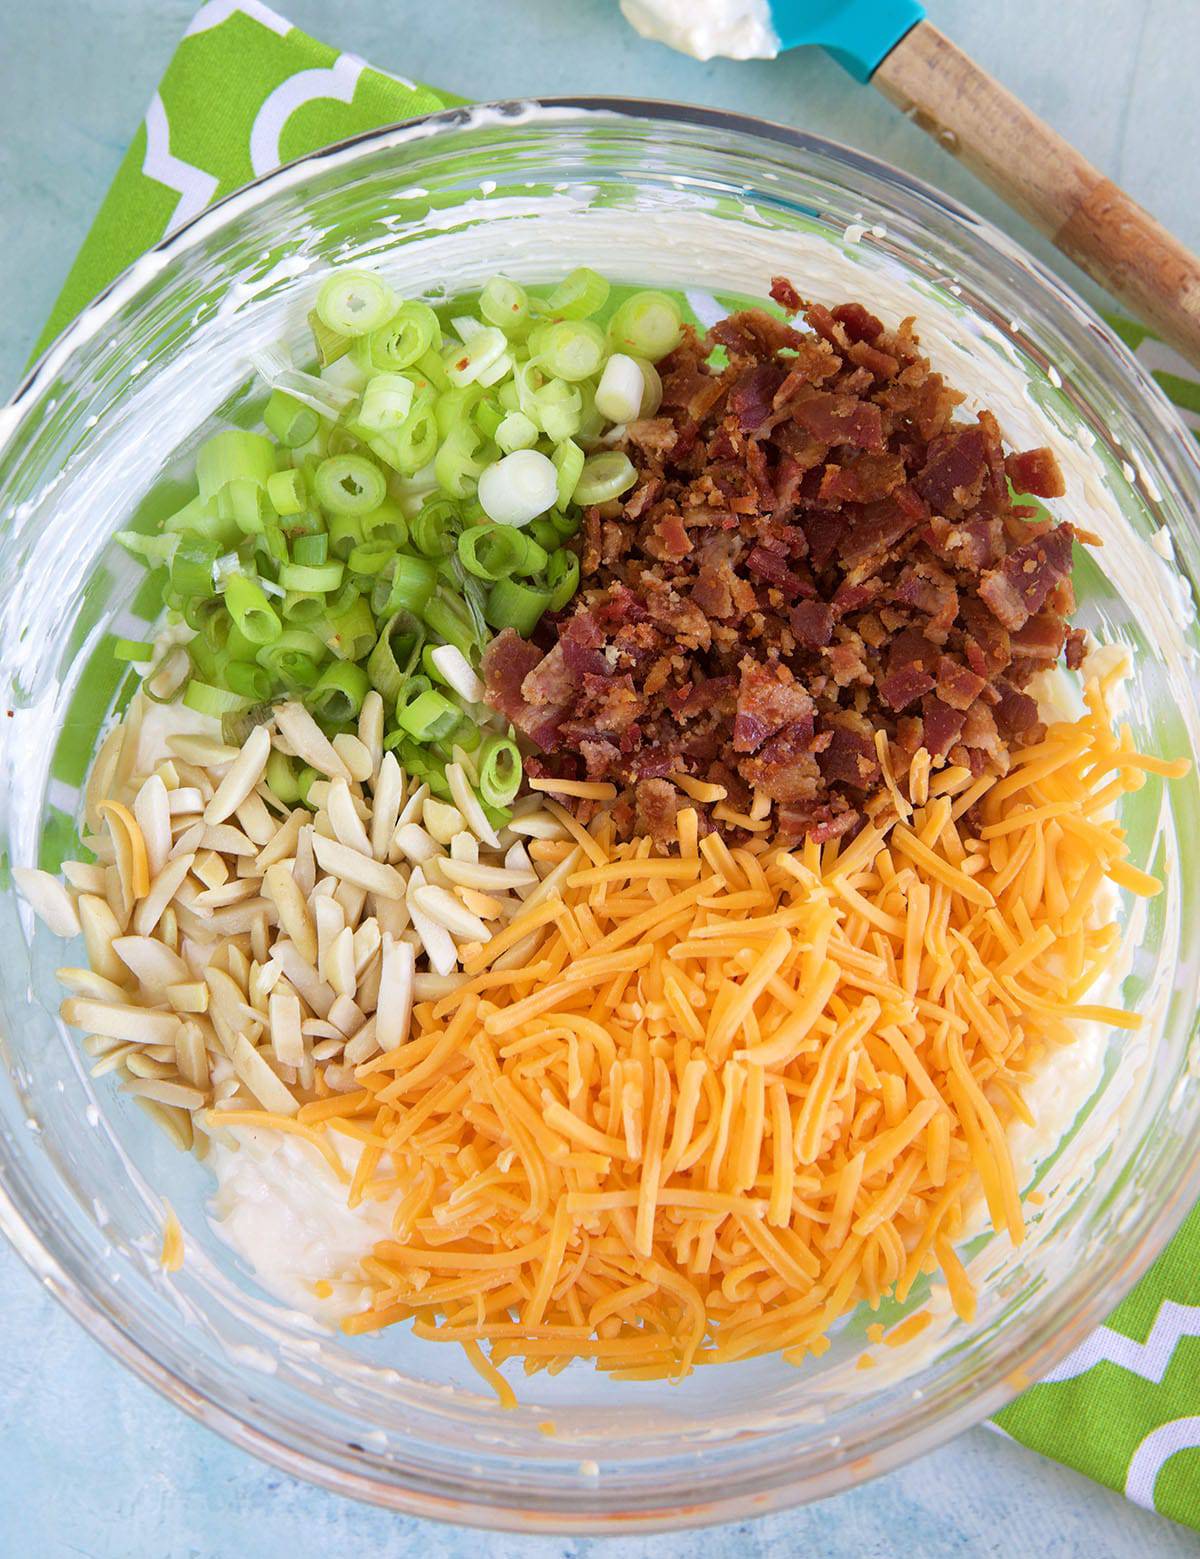 Almonds, cheese, bacon and green onions are placed on top of mayonnaise in a glass bowl.